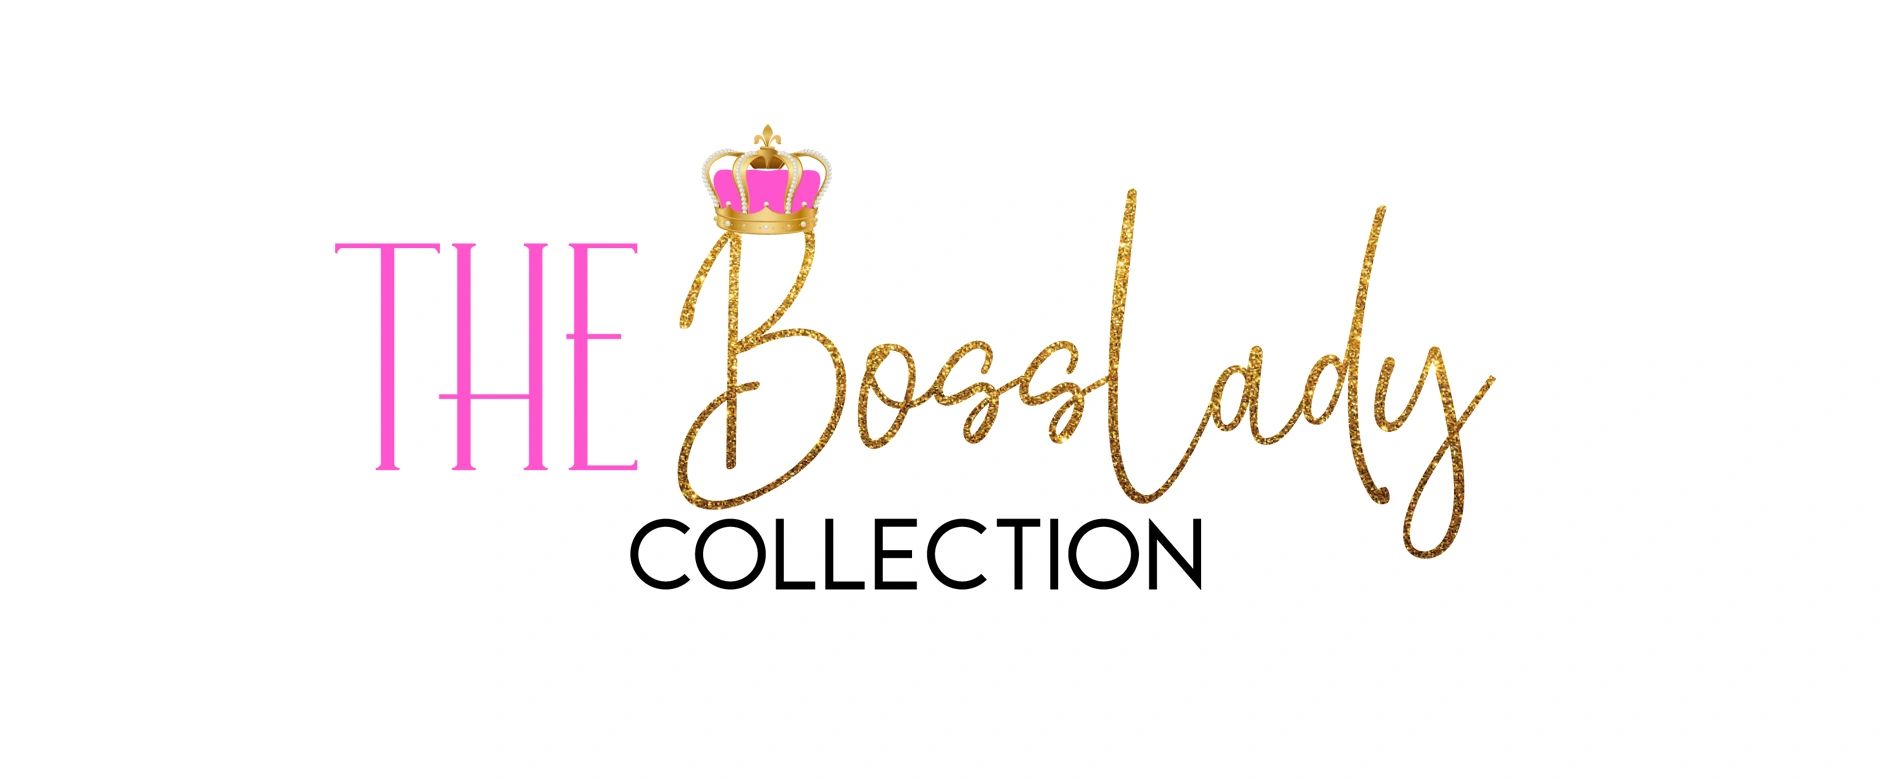 Bosslady Collection Hair, Extensions, Beauty Supply